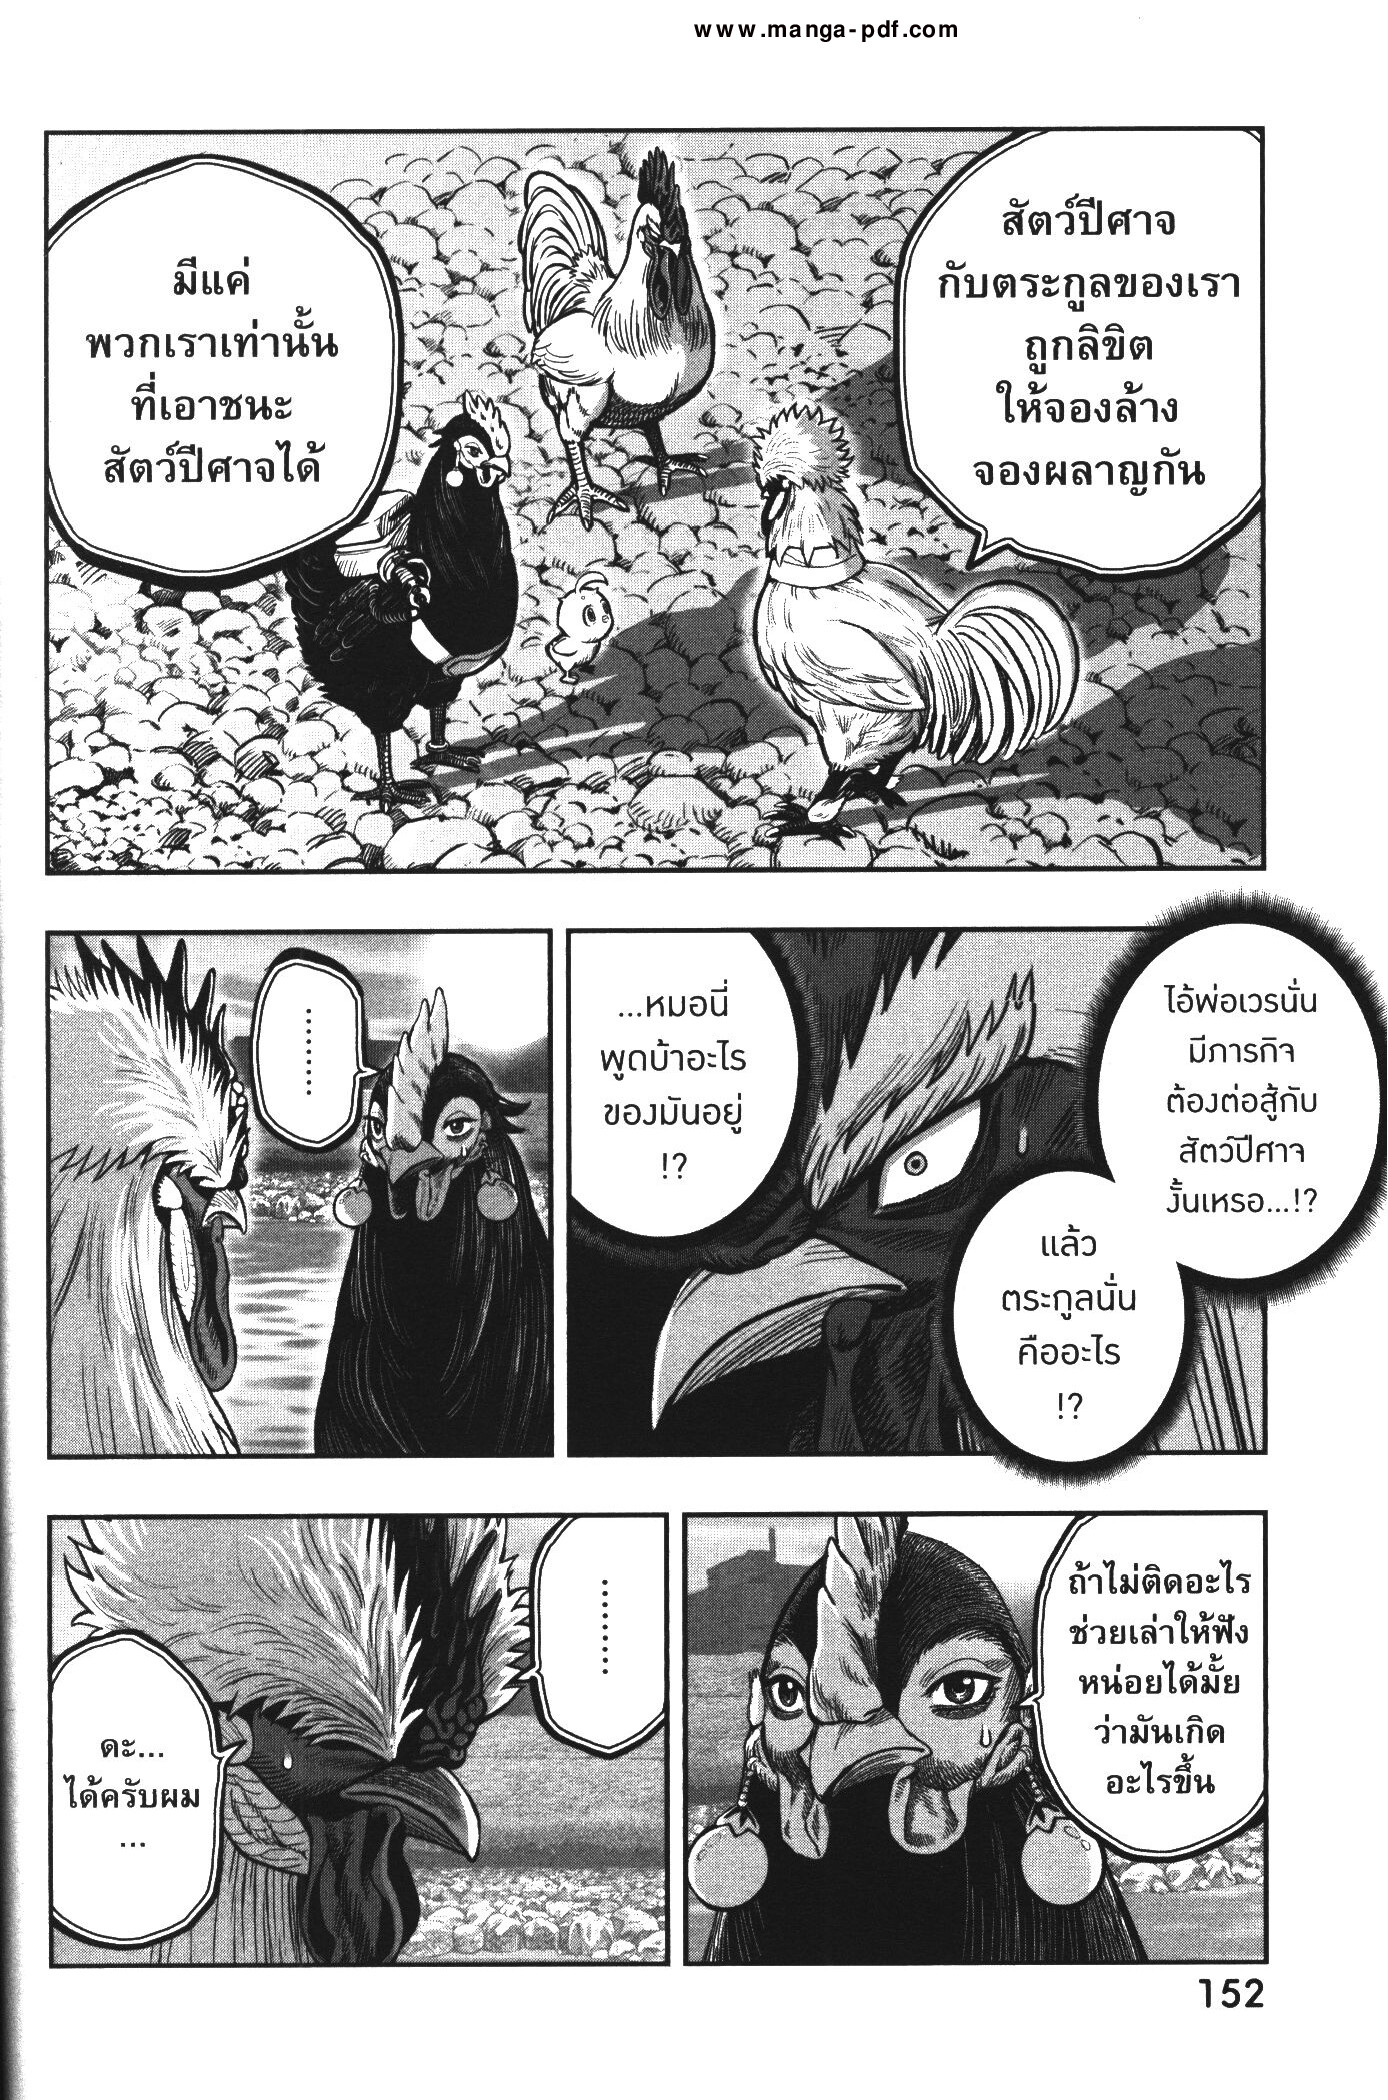 Rooster Fighter 20 (14)